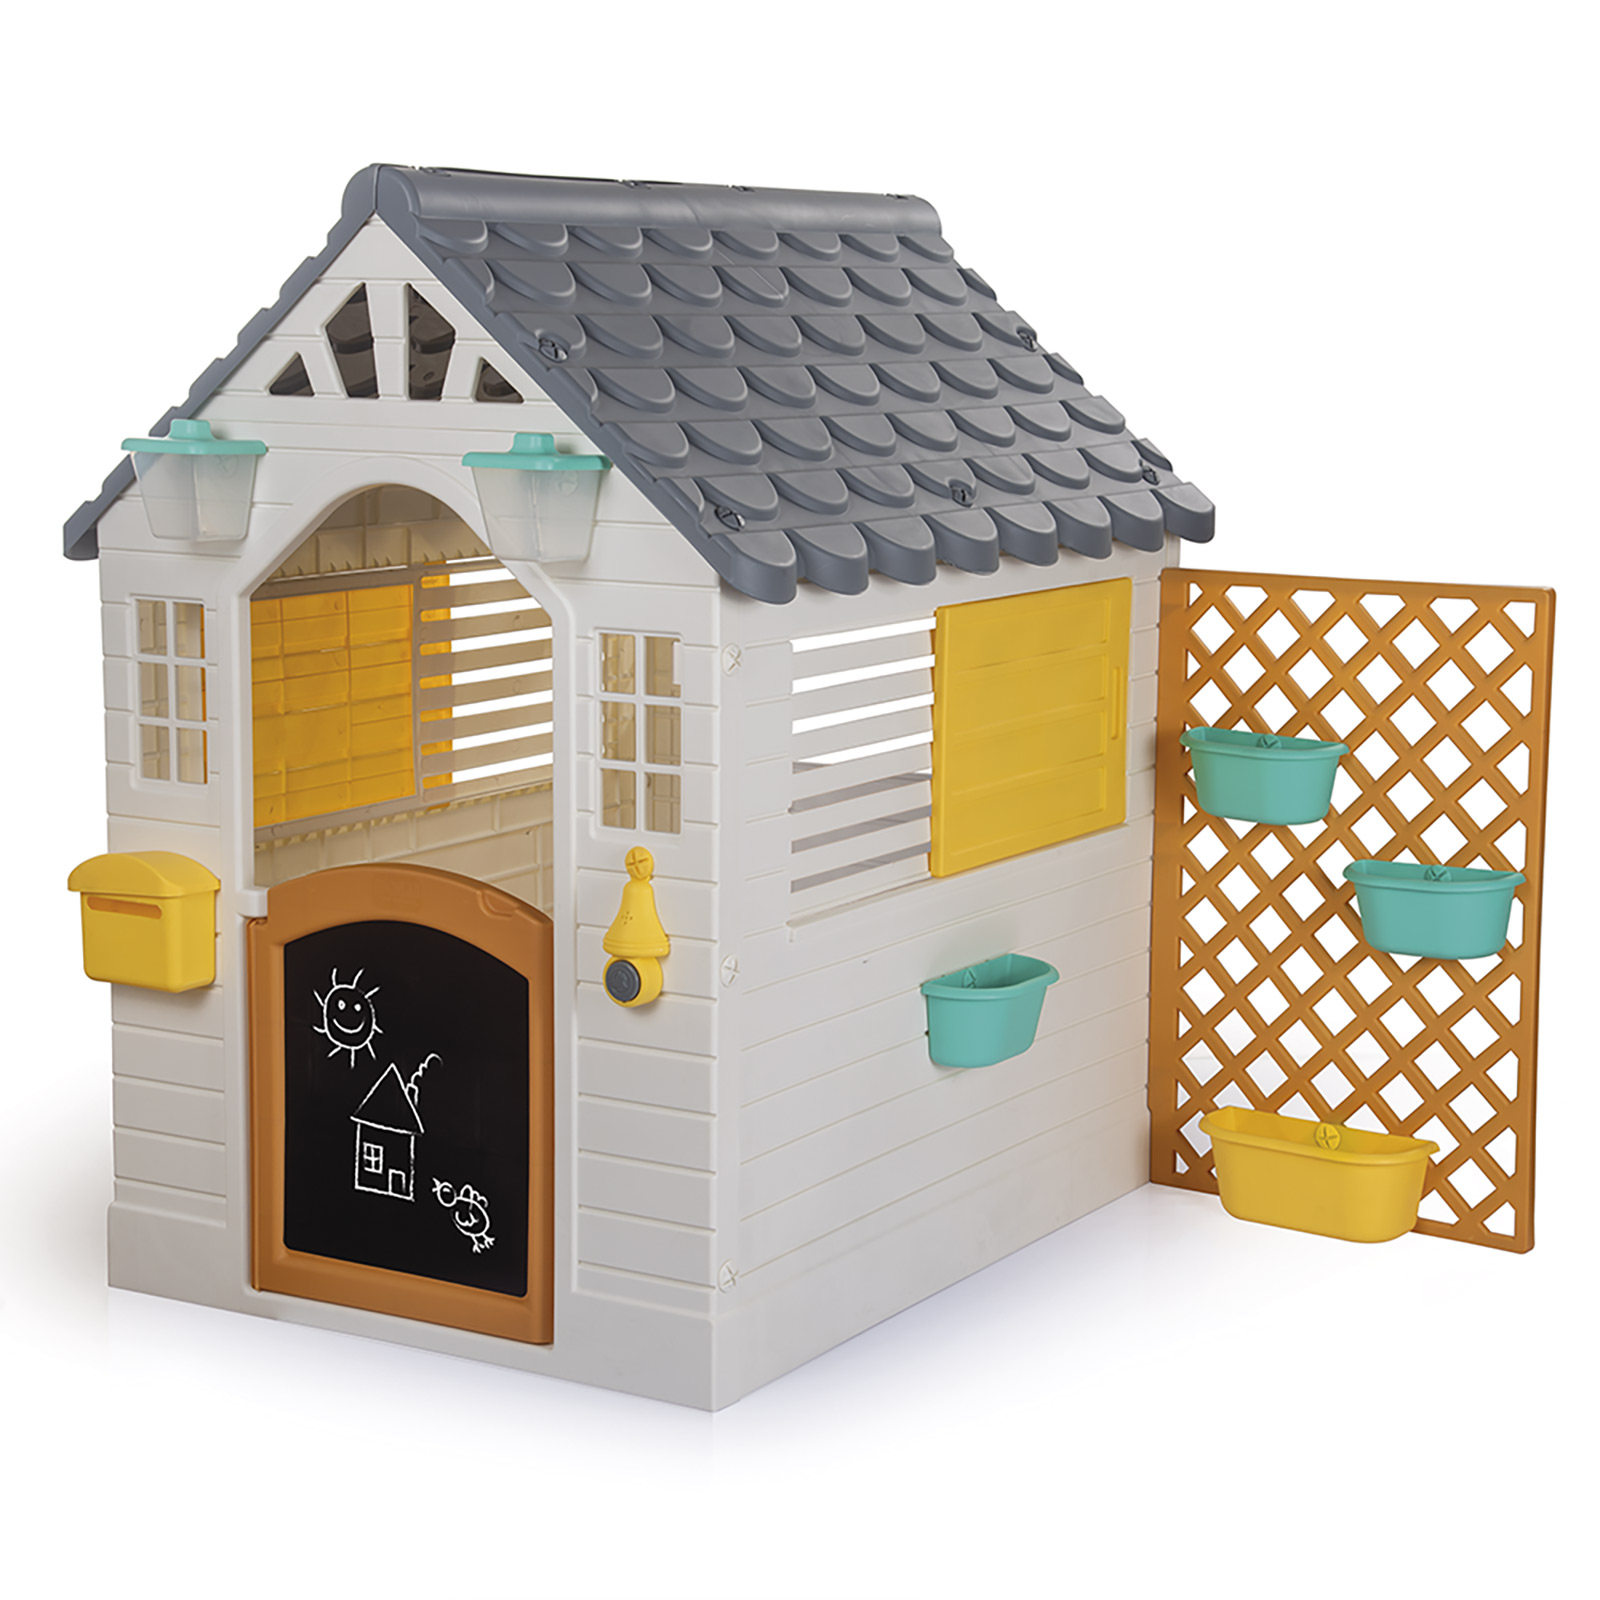 Childrens Playhouse With Playfence - White and Grey (2 - 6 Years)